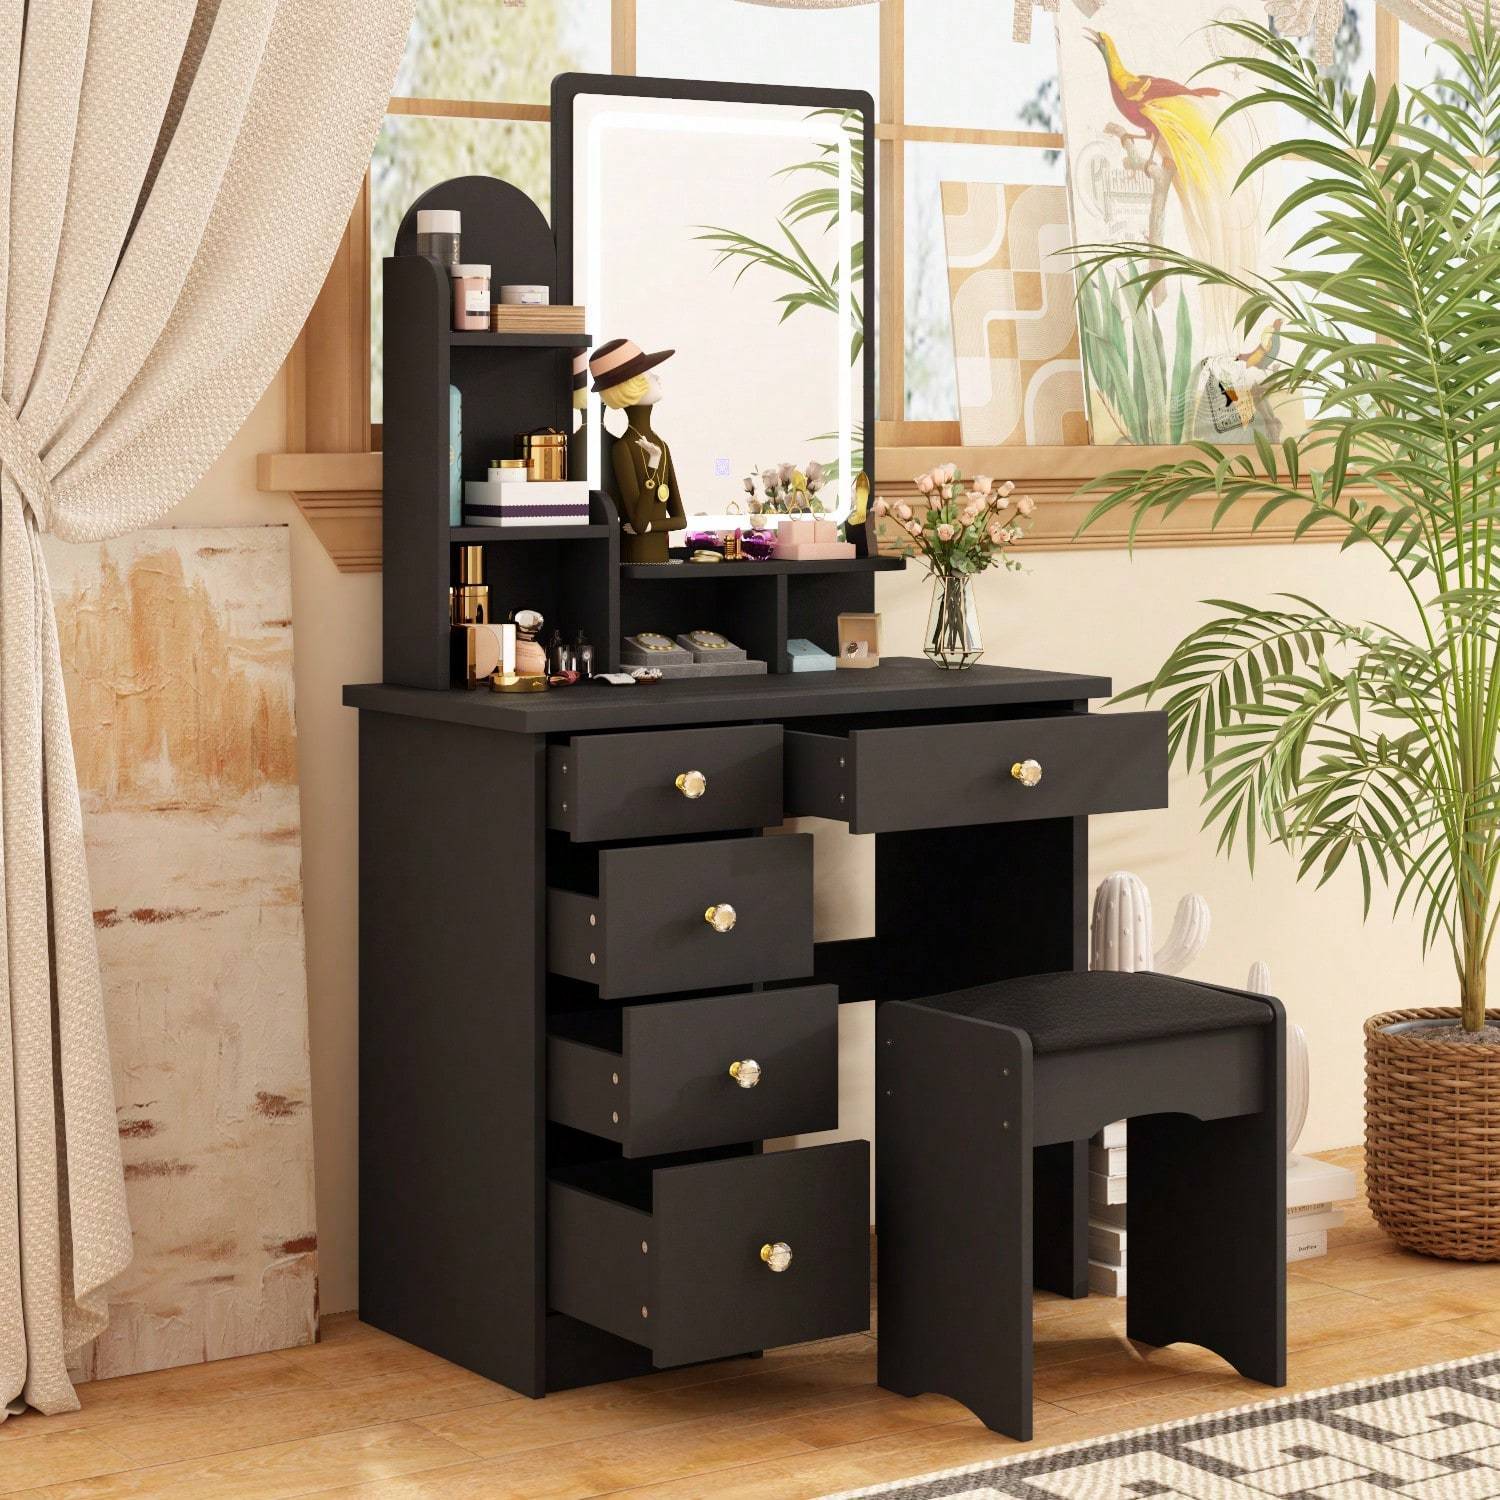 

Vanity Desk, Vanity Table Set With Led Lighted Mirror, Makeup Vanity Dressing Table With 5 Drawers, Storage Shelves And Cushioned Stool, Black